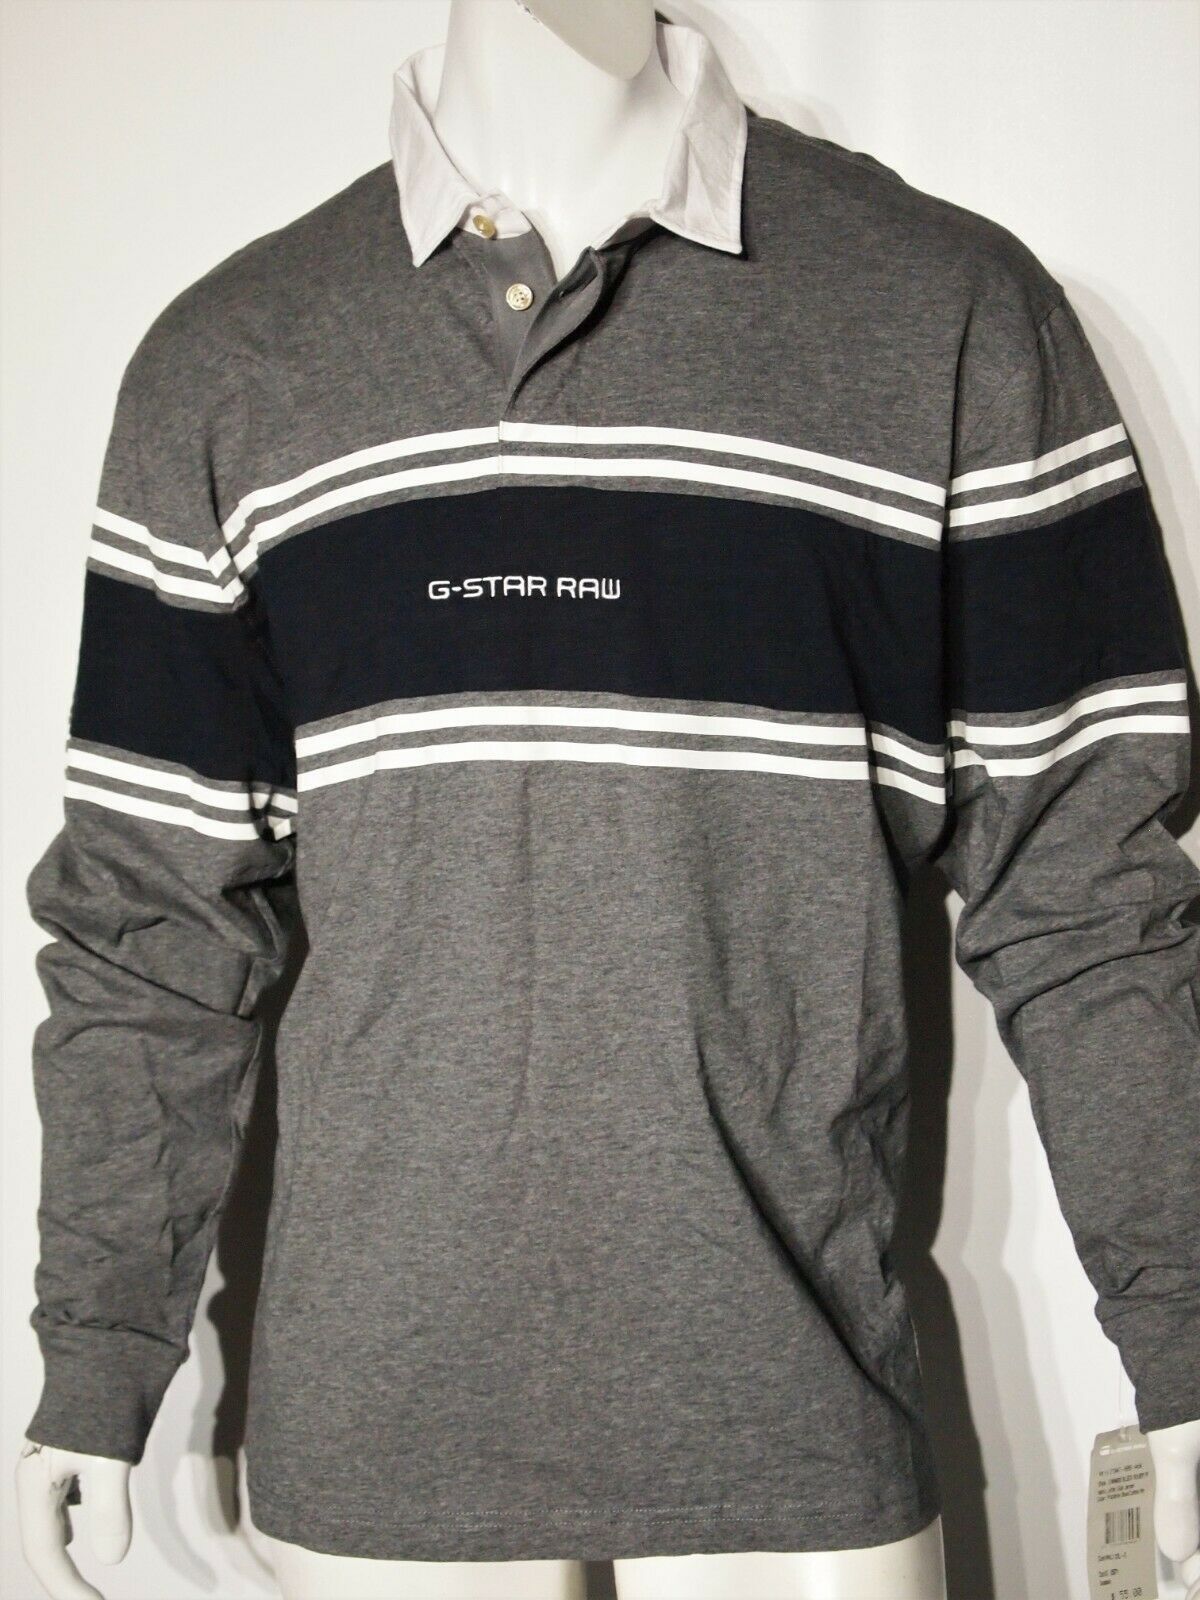 G-Star RAW men's long sleeve rugby polo size xxl - Polos